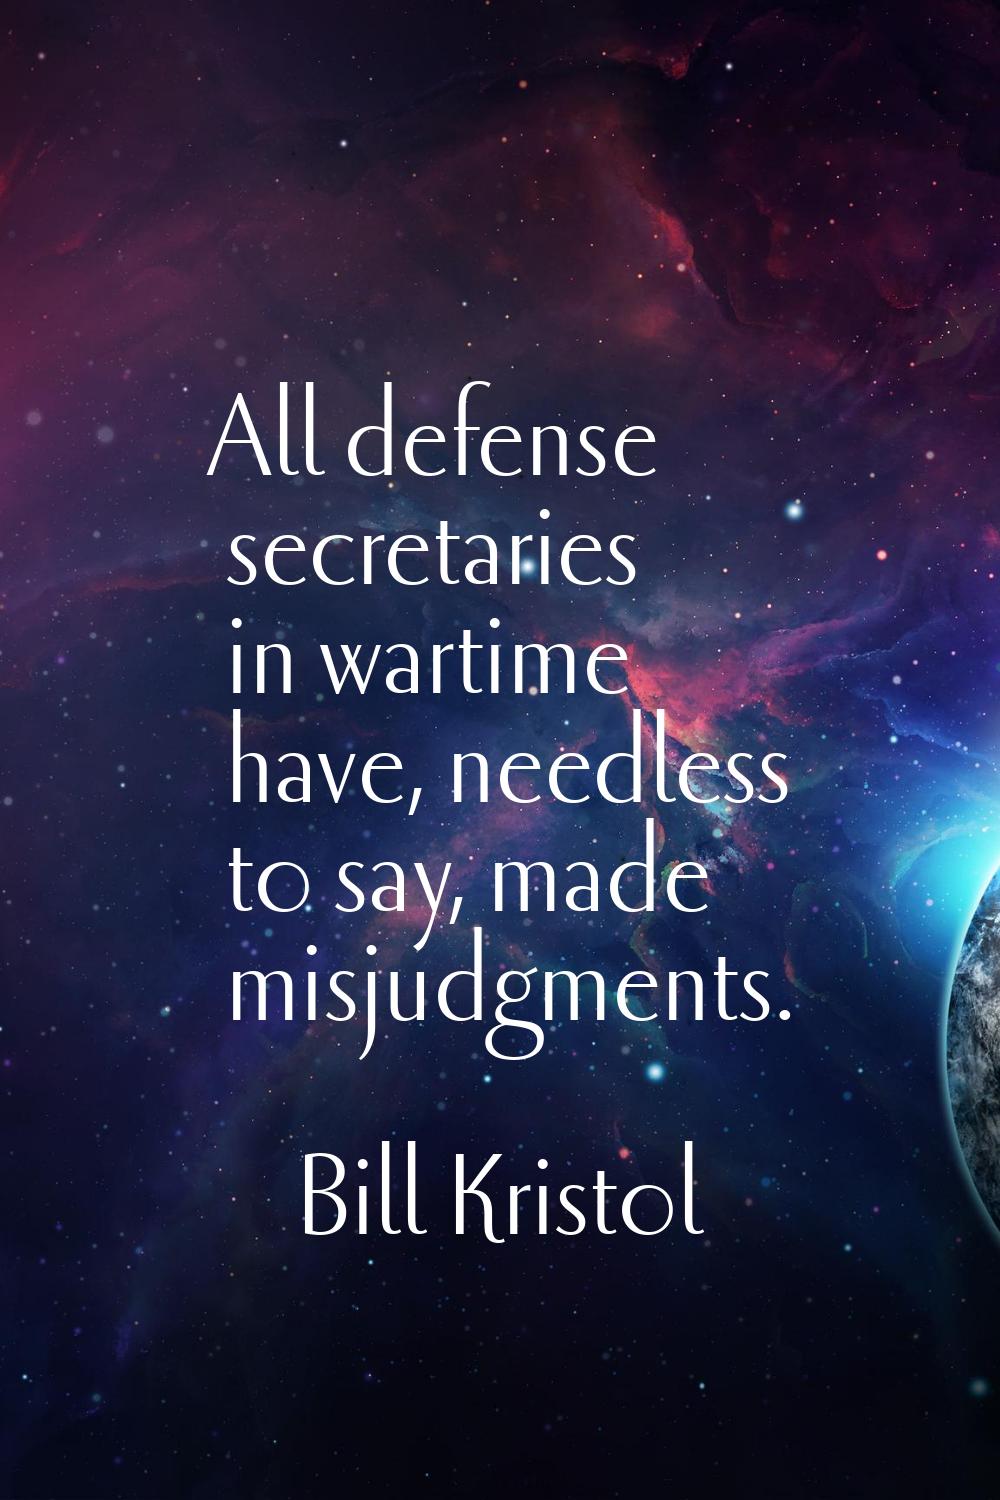 All defense secretaries in wartime have, needless to say, made misjudgments.